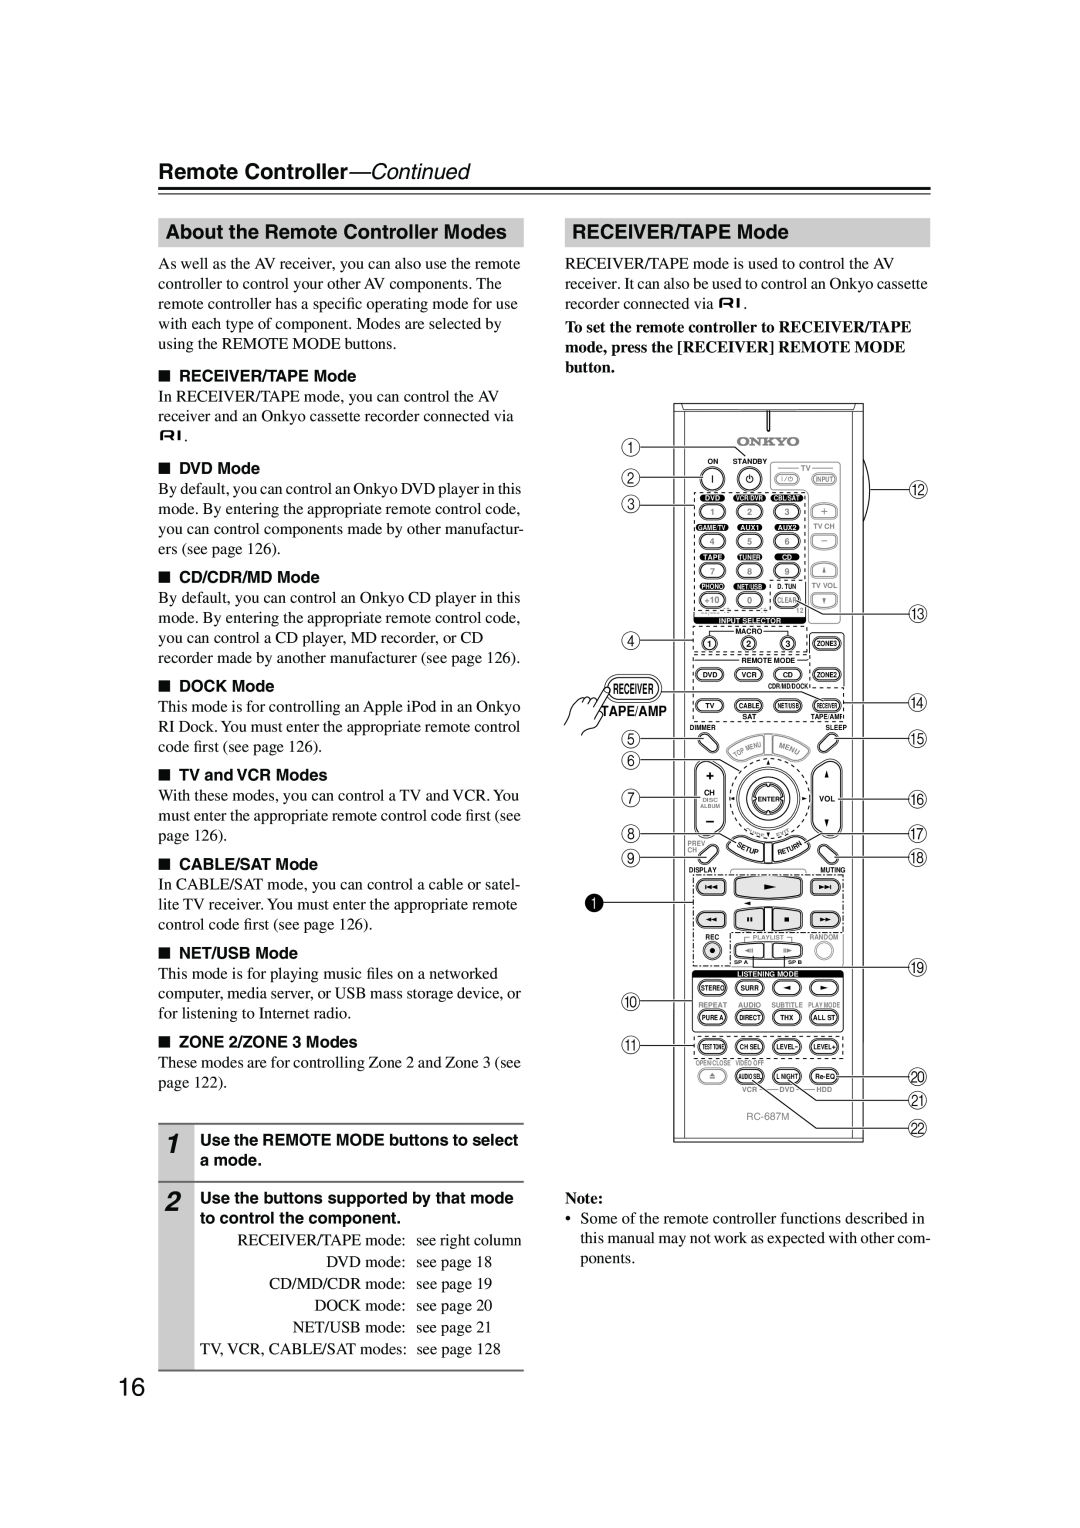 Onkyo TX-NR905 instruction manual Remote Controller—Continued, About the Remote Controller Modes, RECEIVER/TAPE Mode 